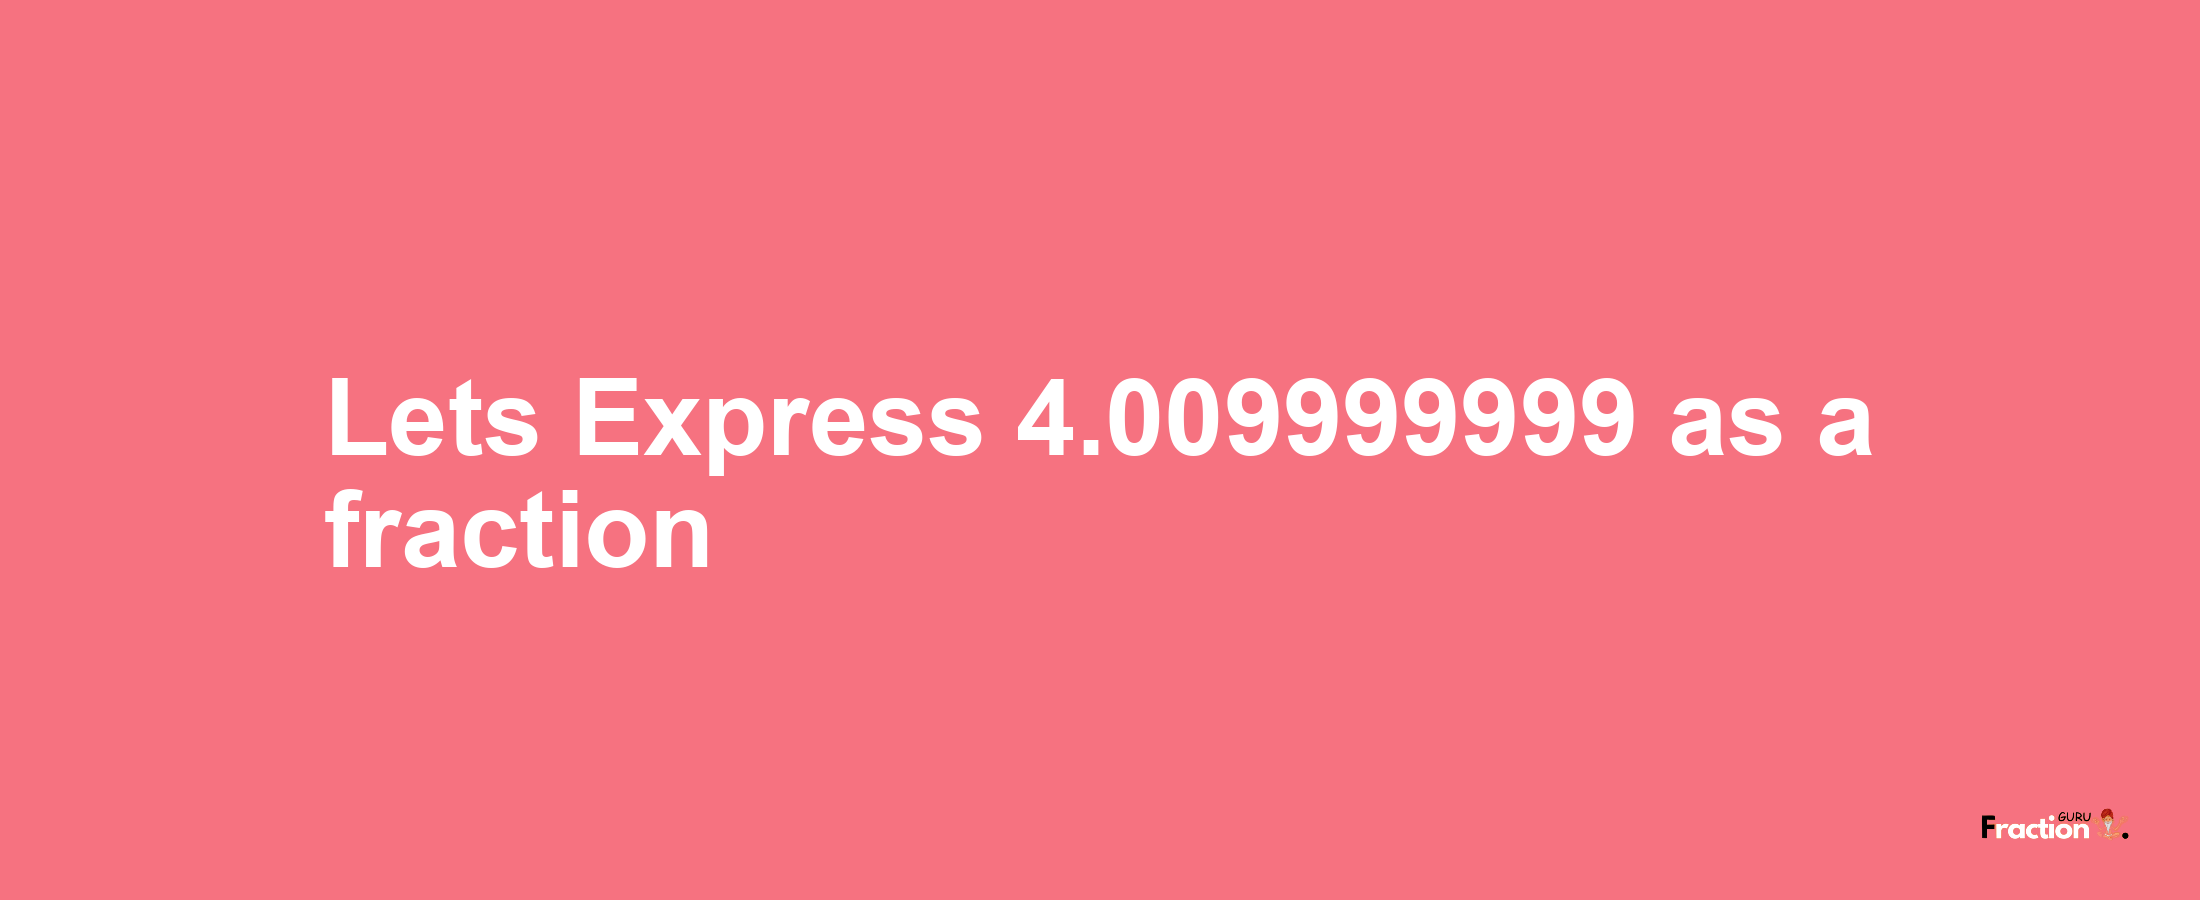 Lets Express 4.009999999 as afraction